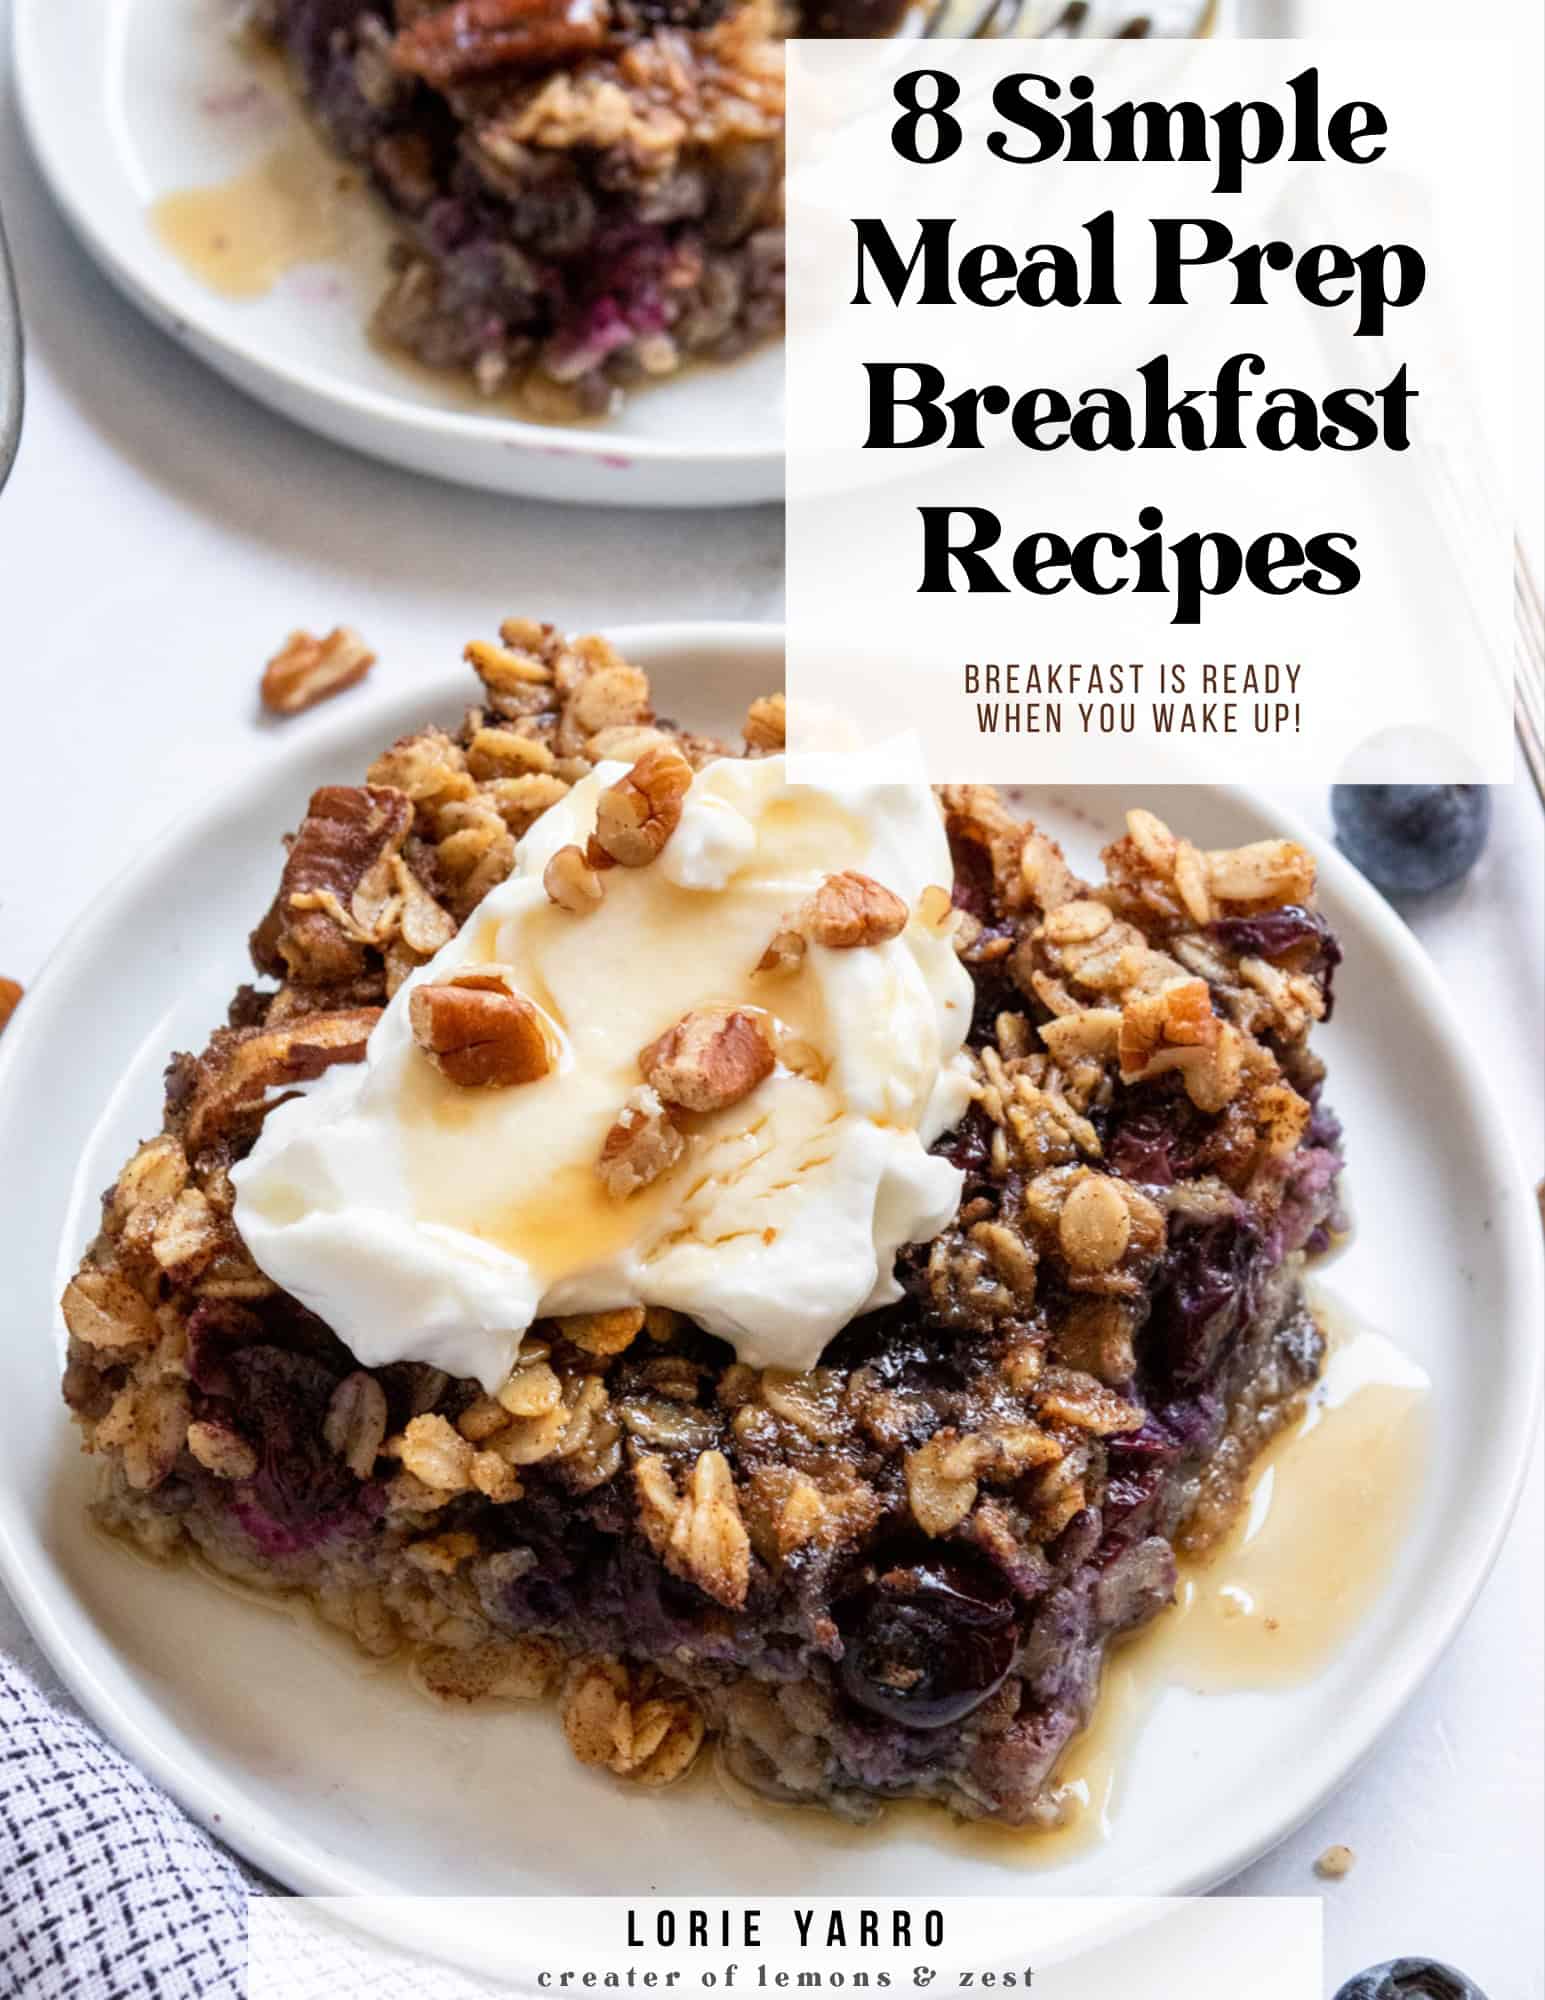 Cover image for ebook with title and blueberry baked oatmeal.